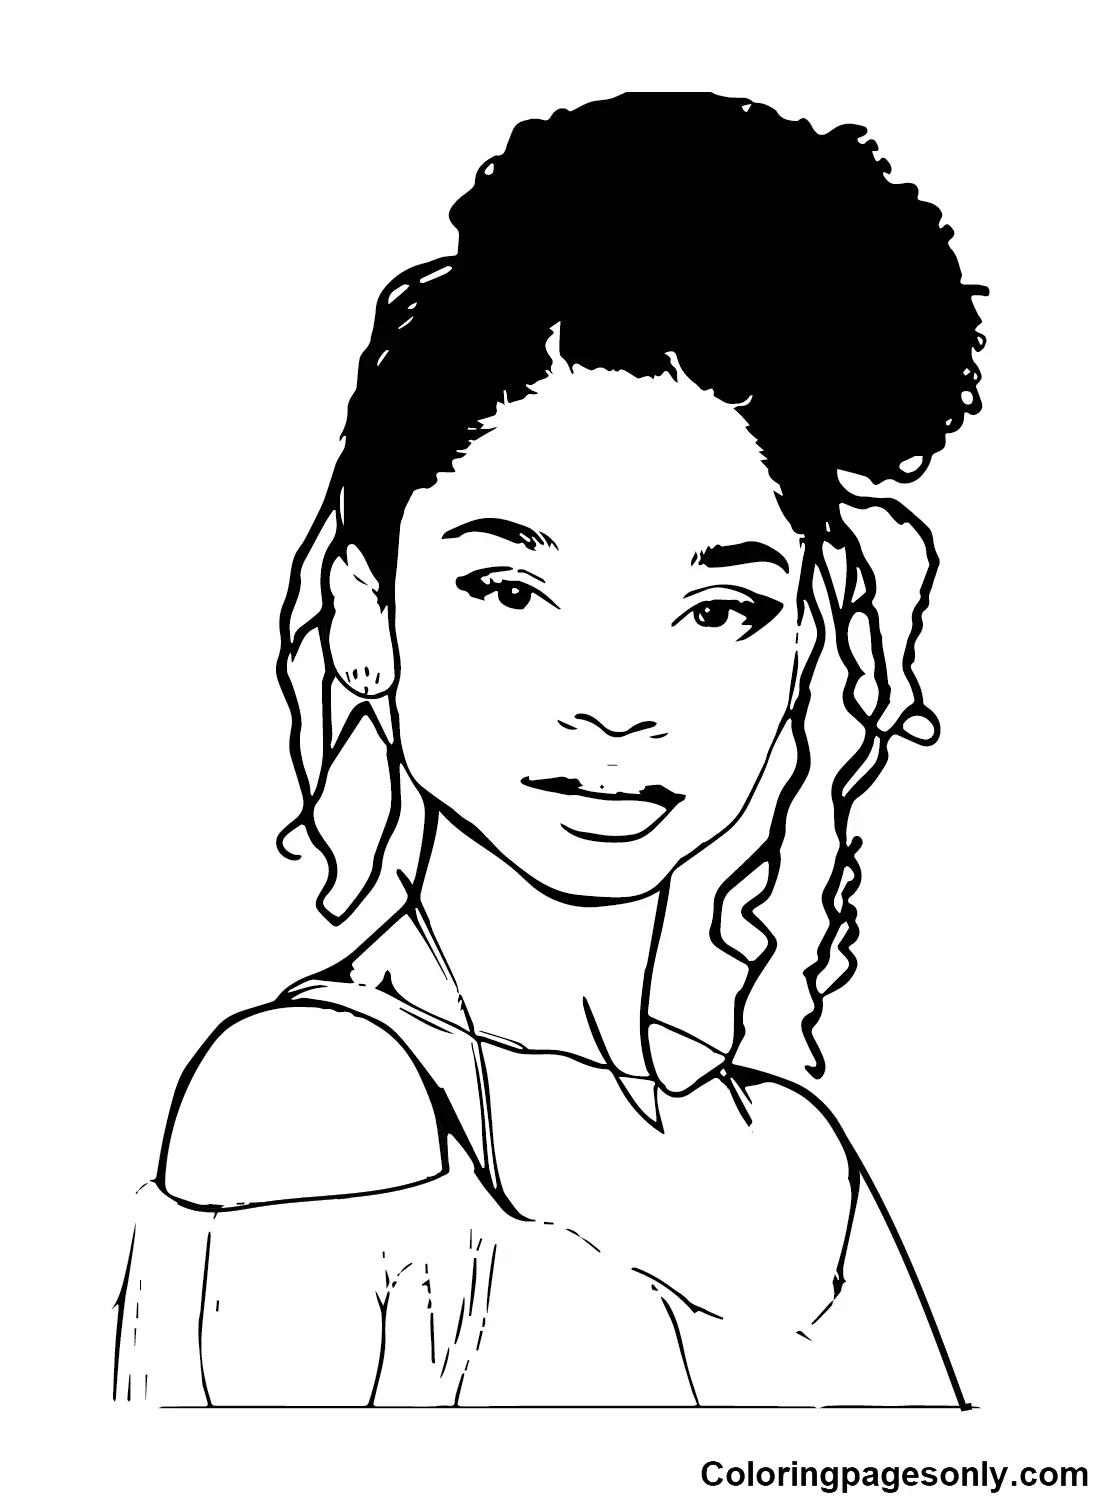 Halle Bailey Coloring Pages